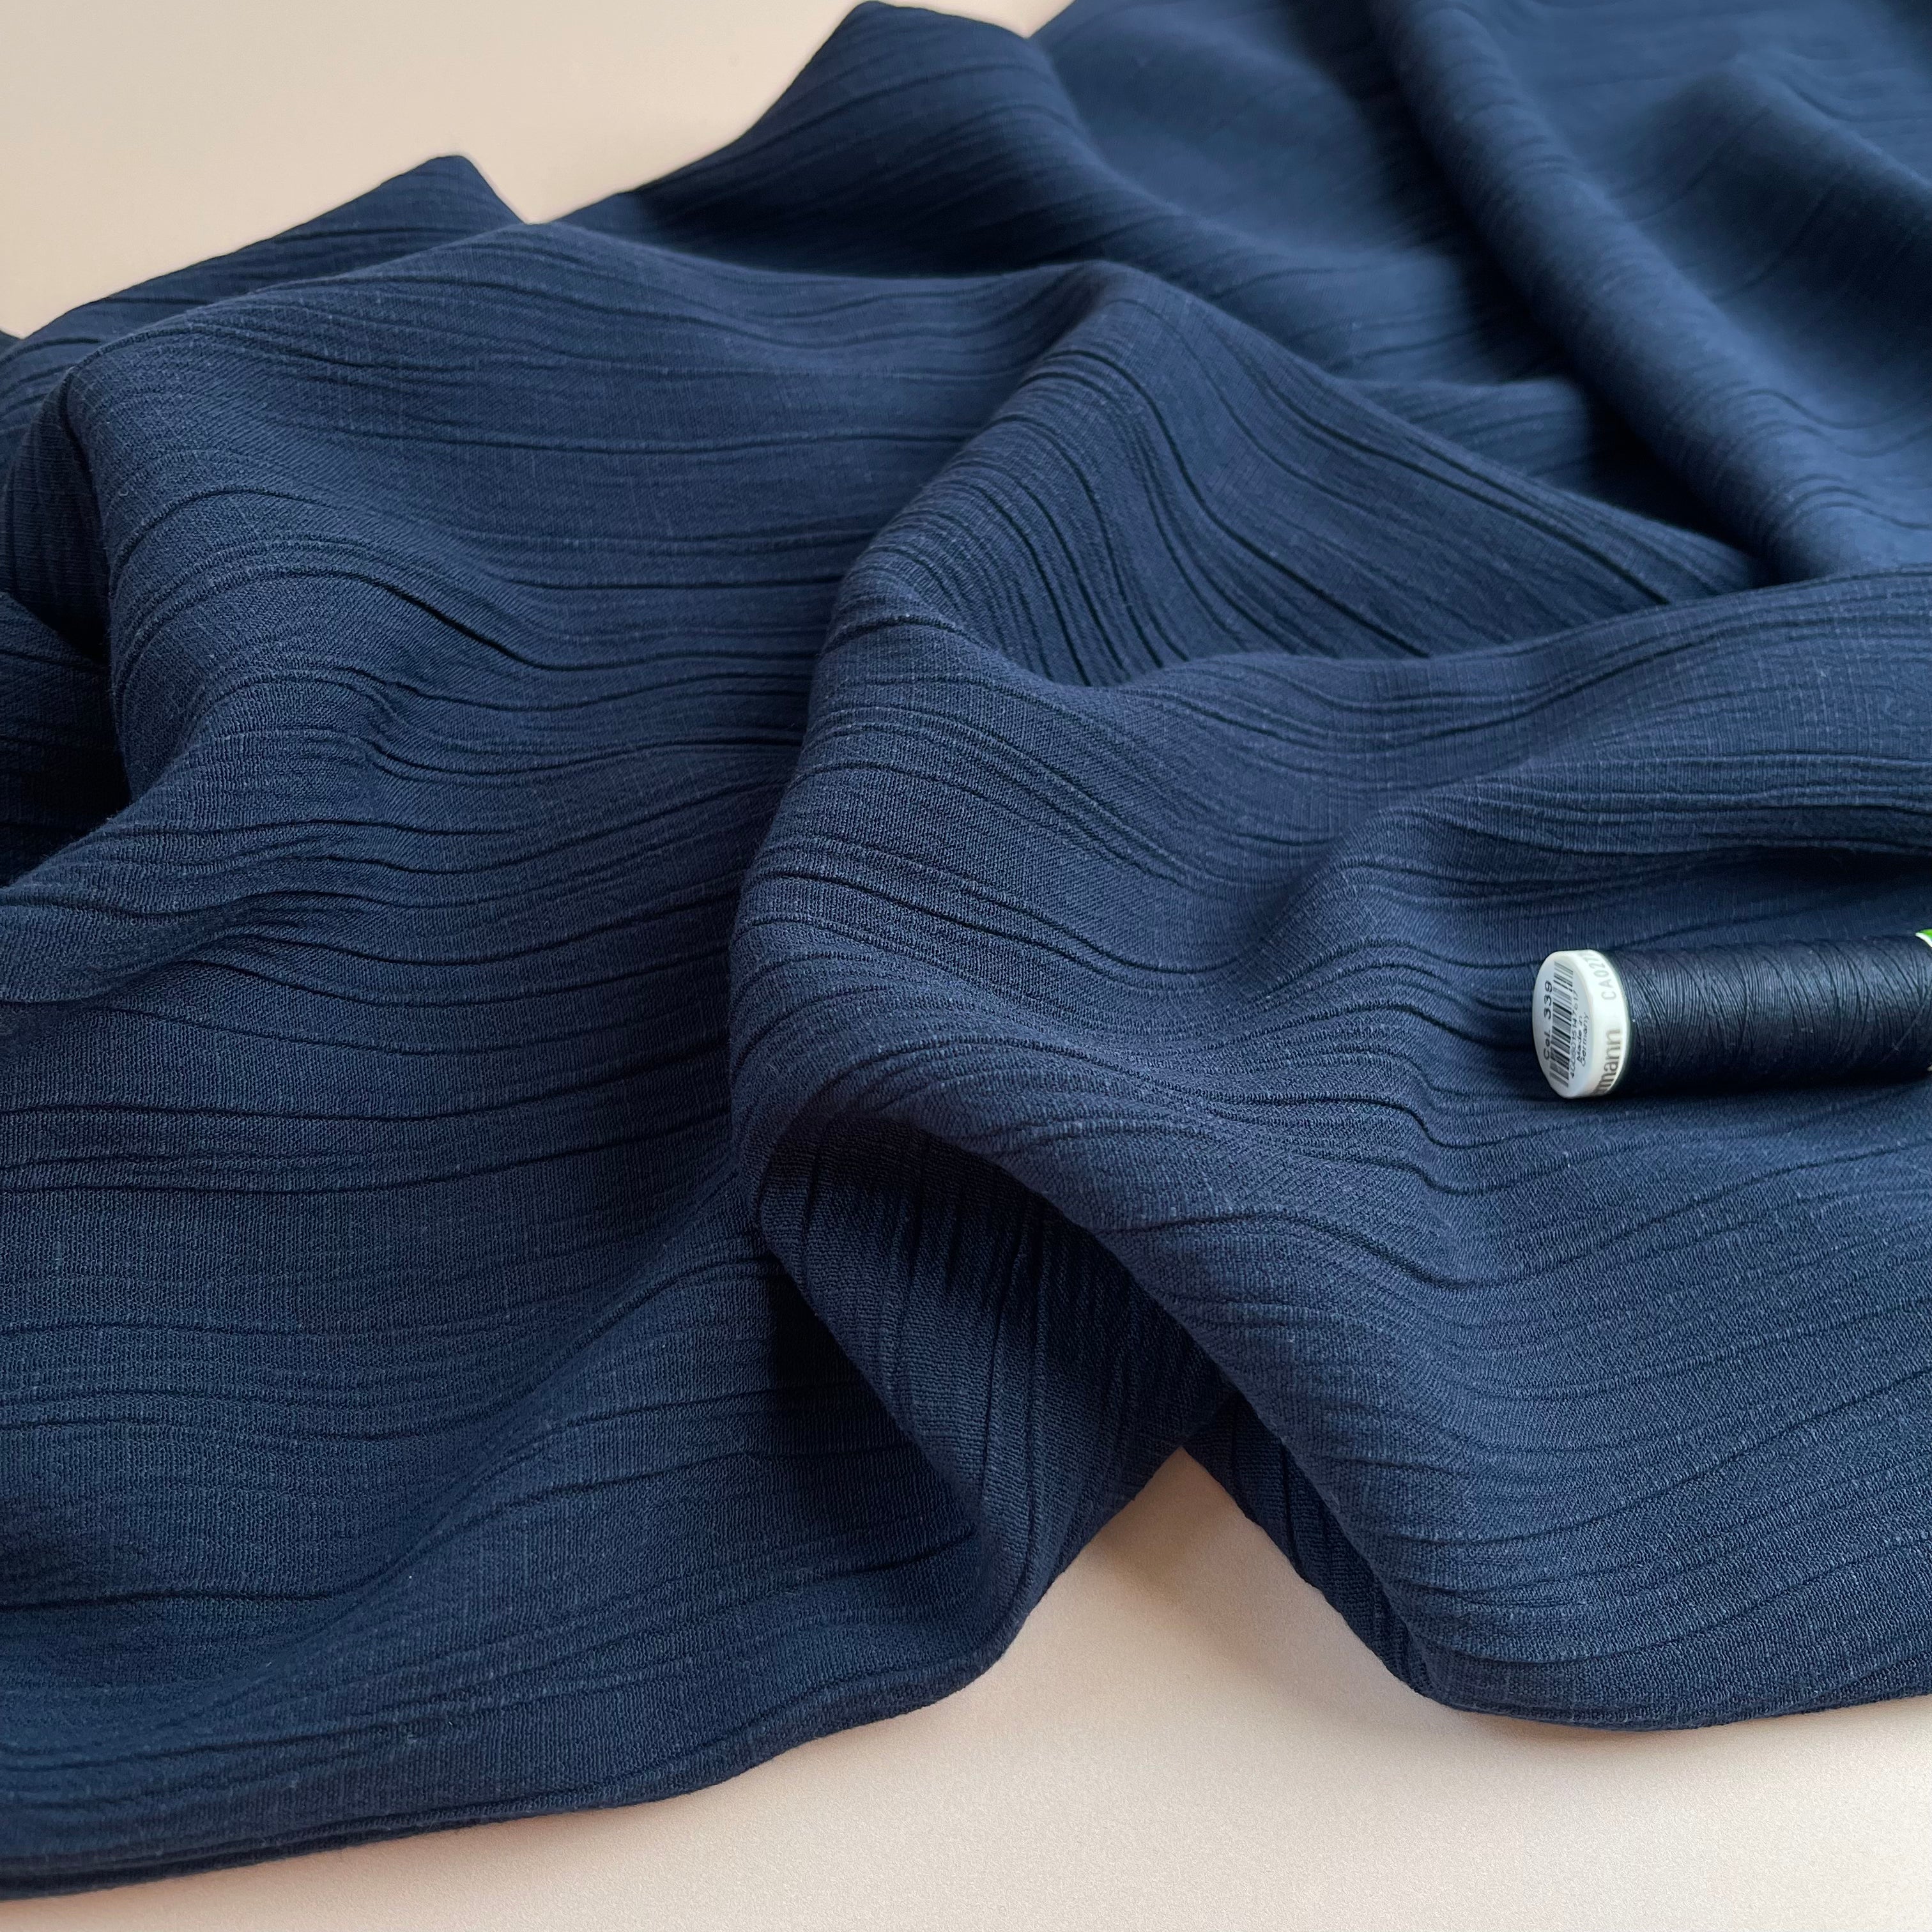 Crinkle Viscose Linen Blend Fabric in Navy